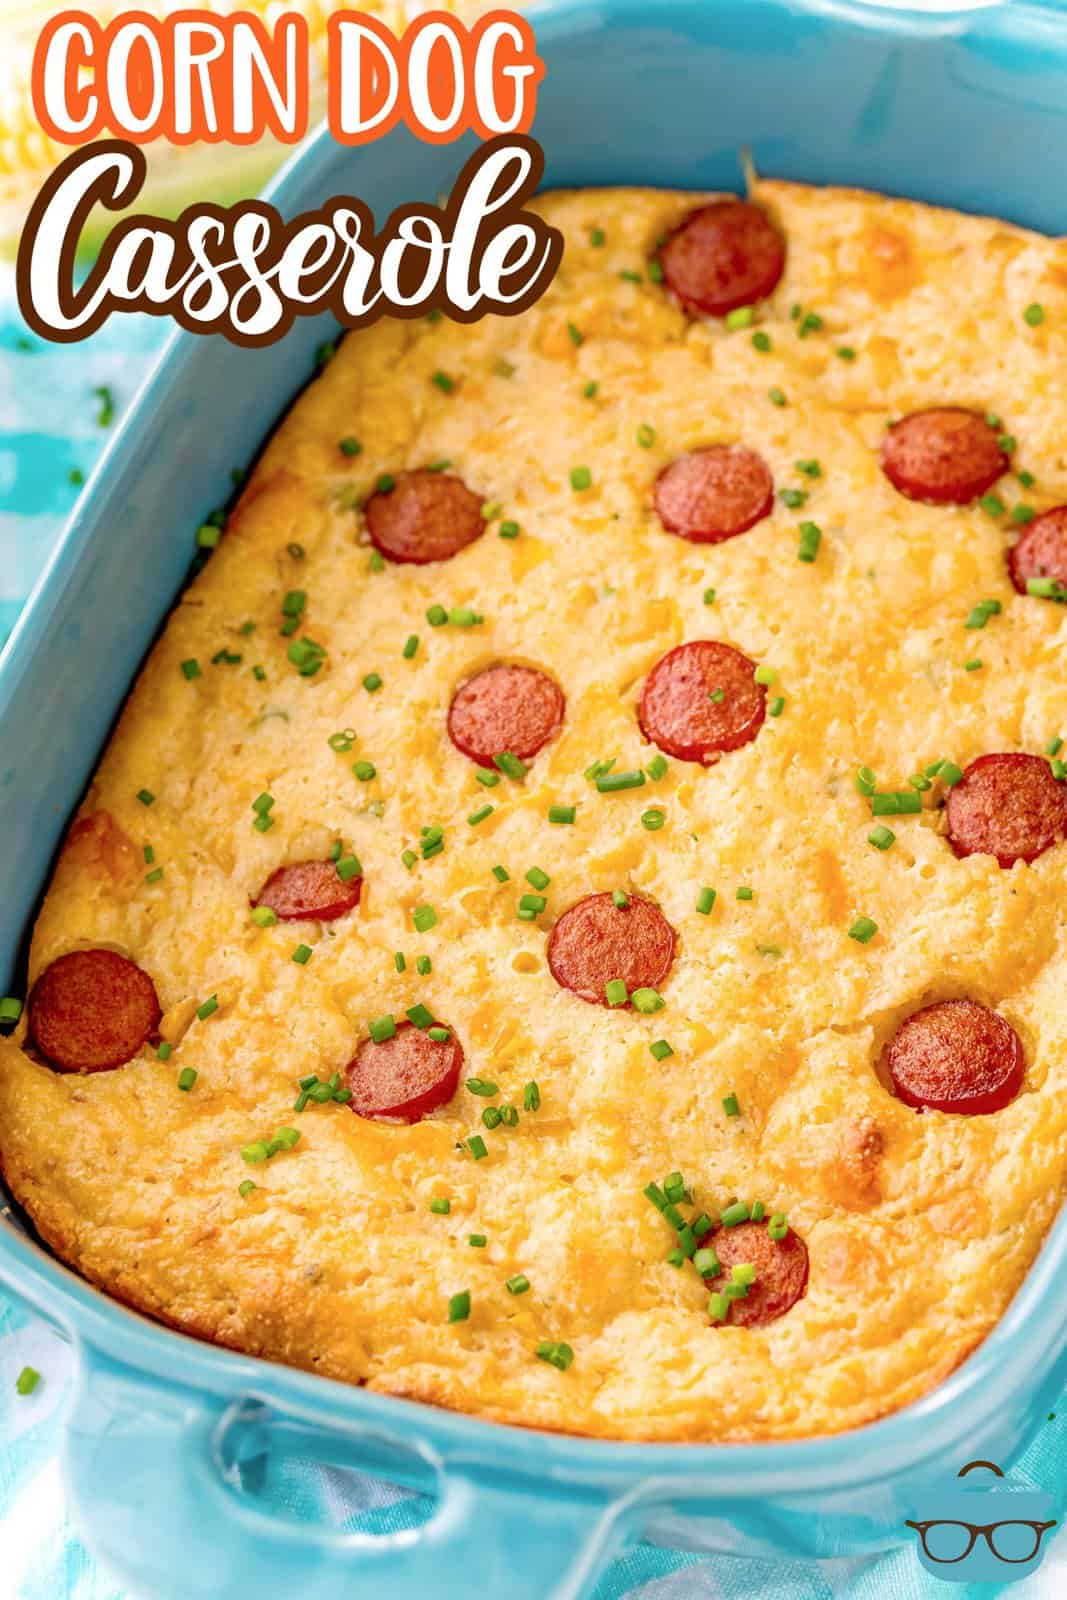 Corn Dog Casserole recipe from The Country Cook.